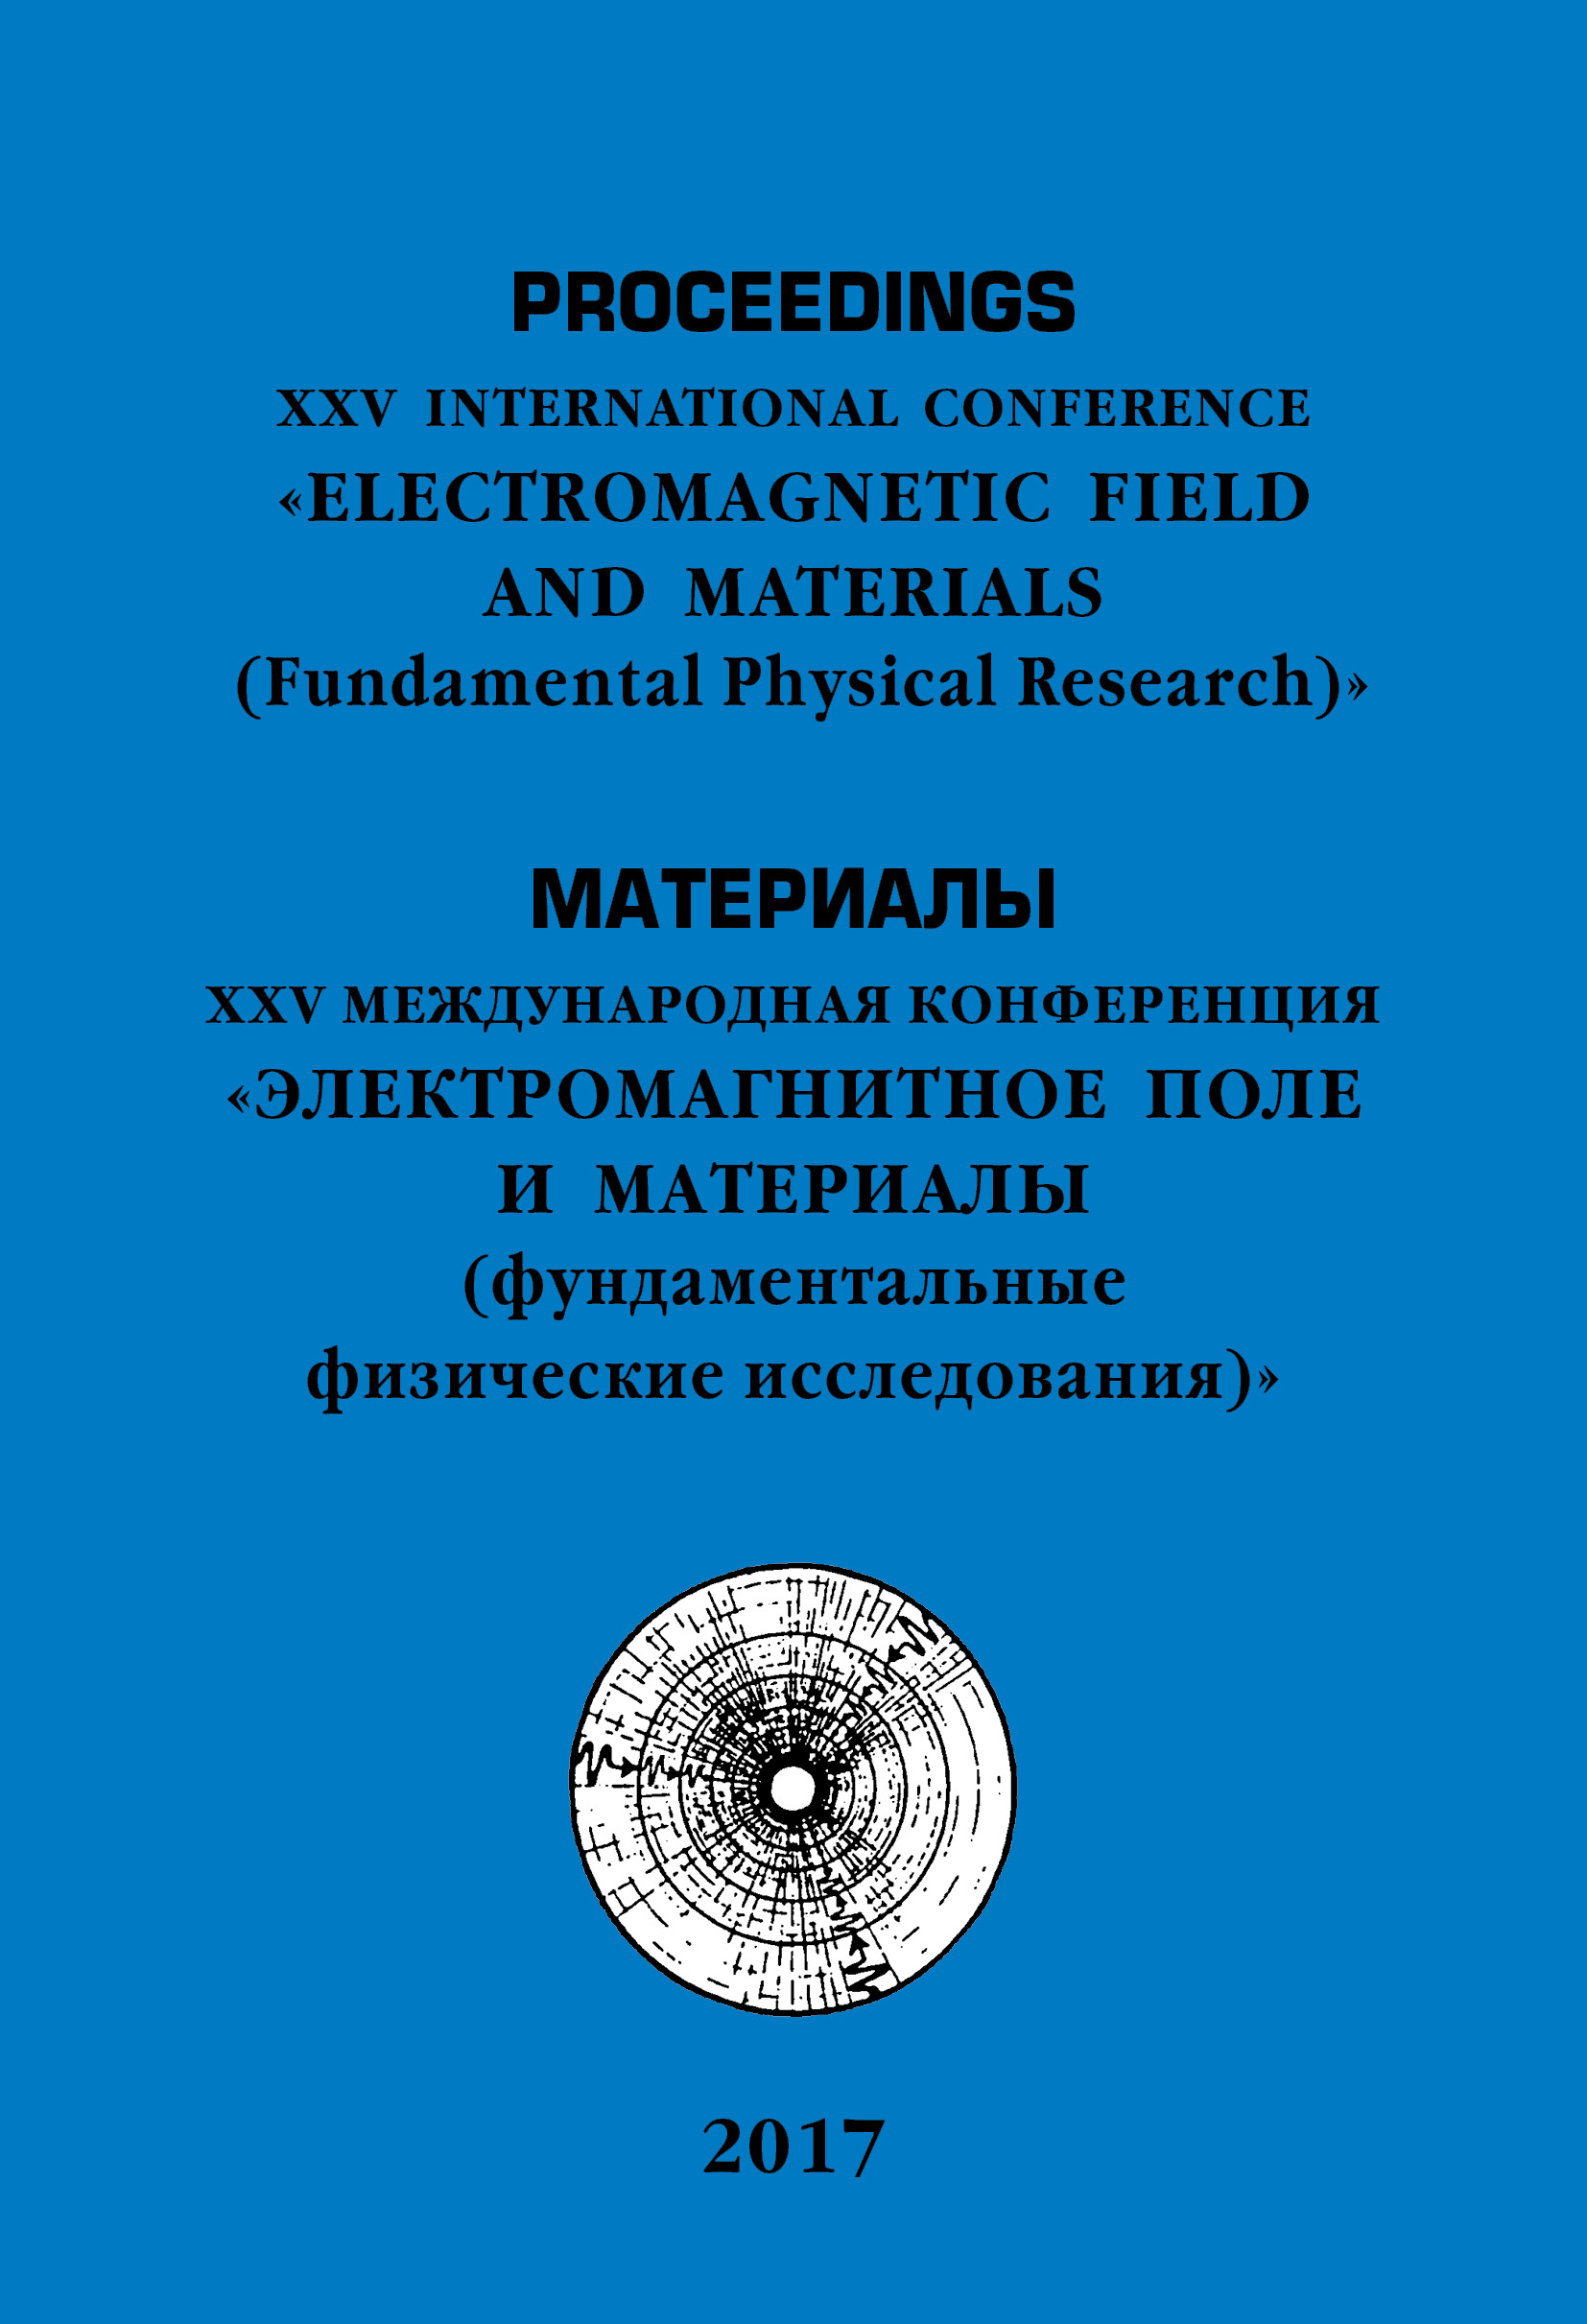                         ELECTROMAGNETIC FIELD AND MATERIALS (FUNDAMENTAL PHYSICAL RESEARCH)
            